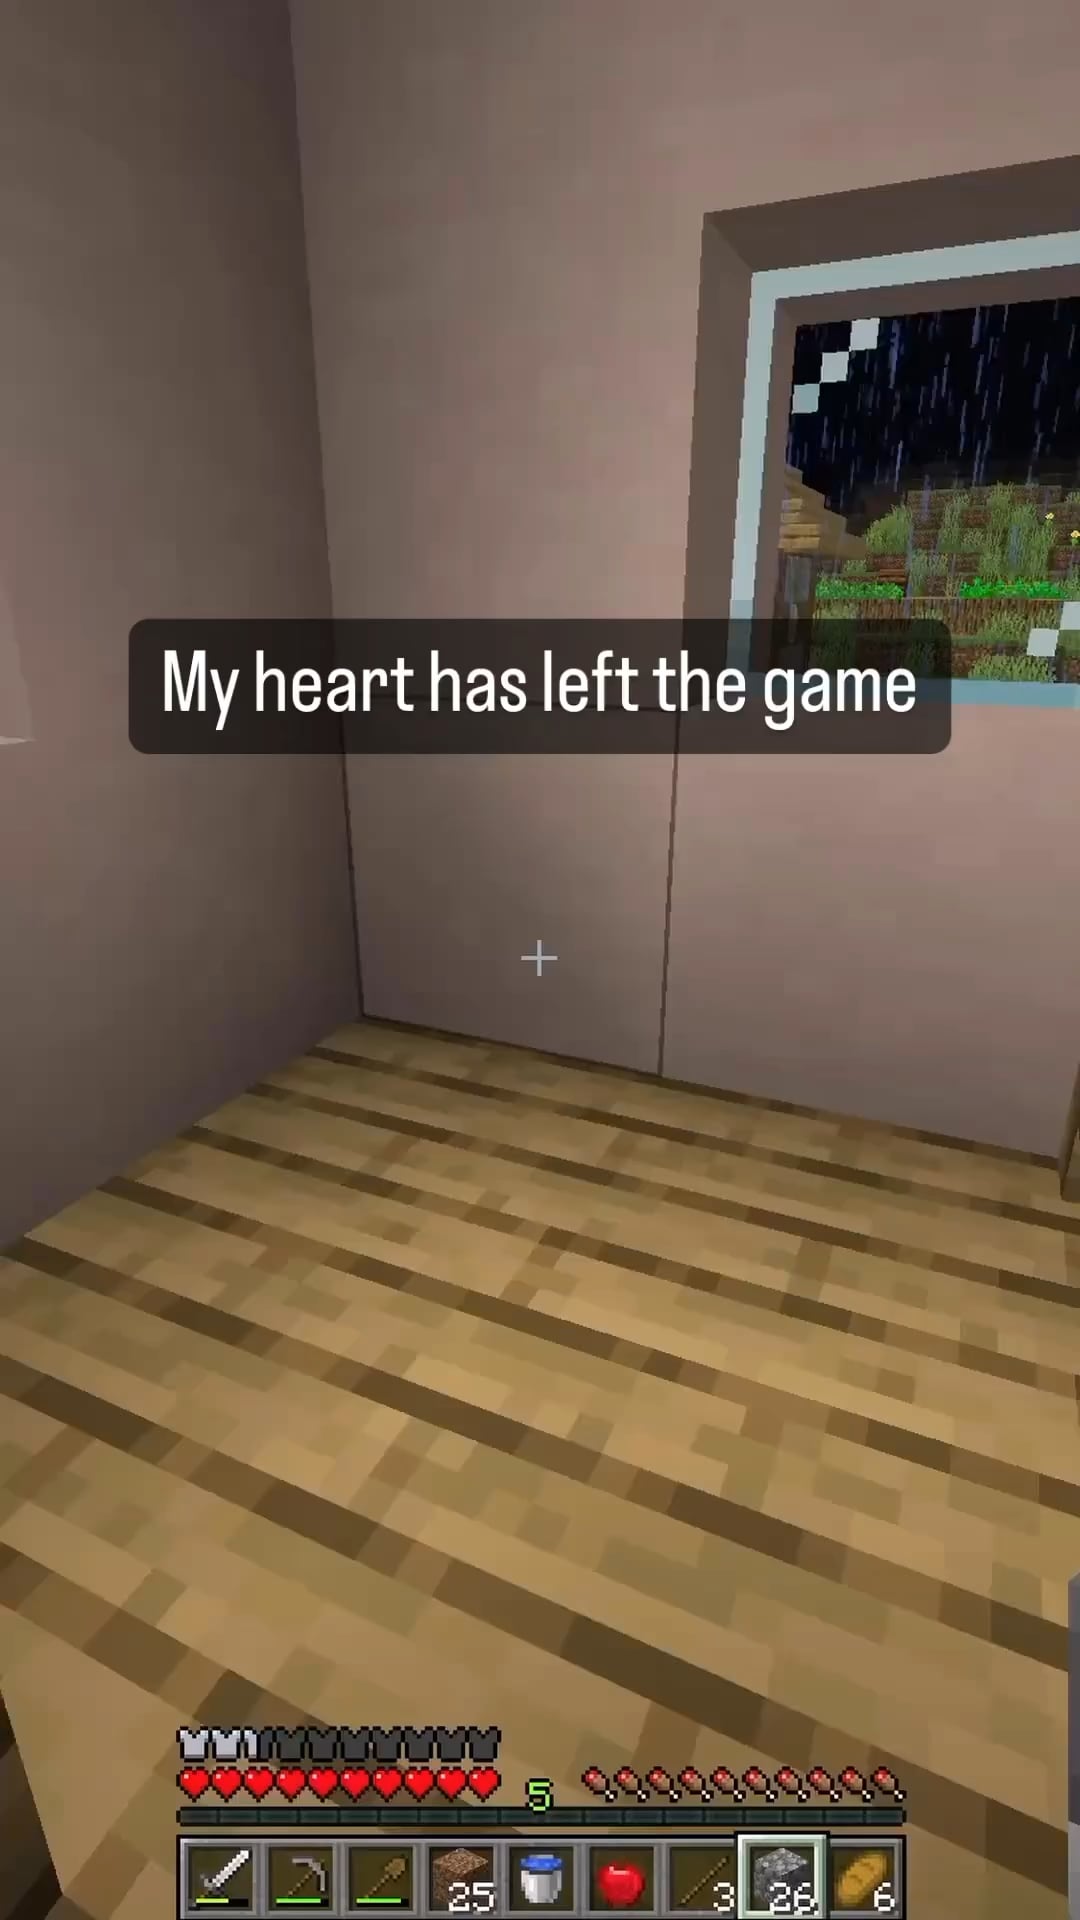 Minecraft Memes - "Nearly tossed my phone 😂🔥"